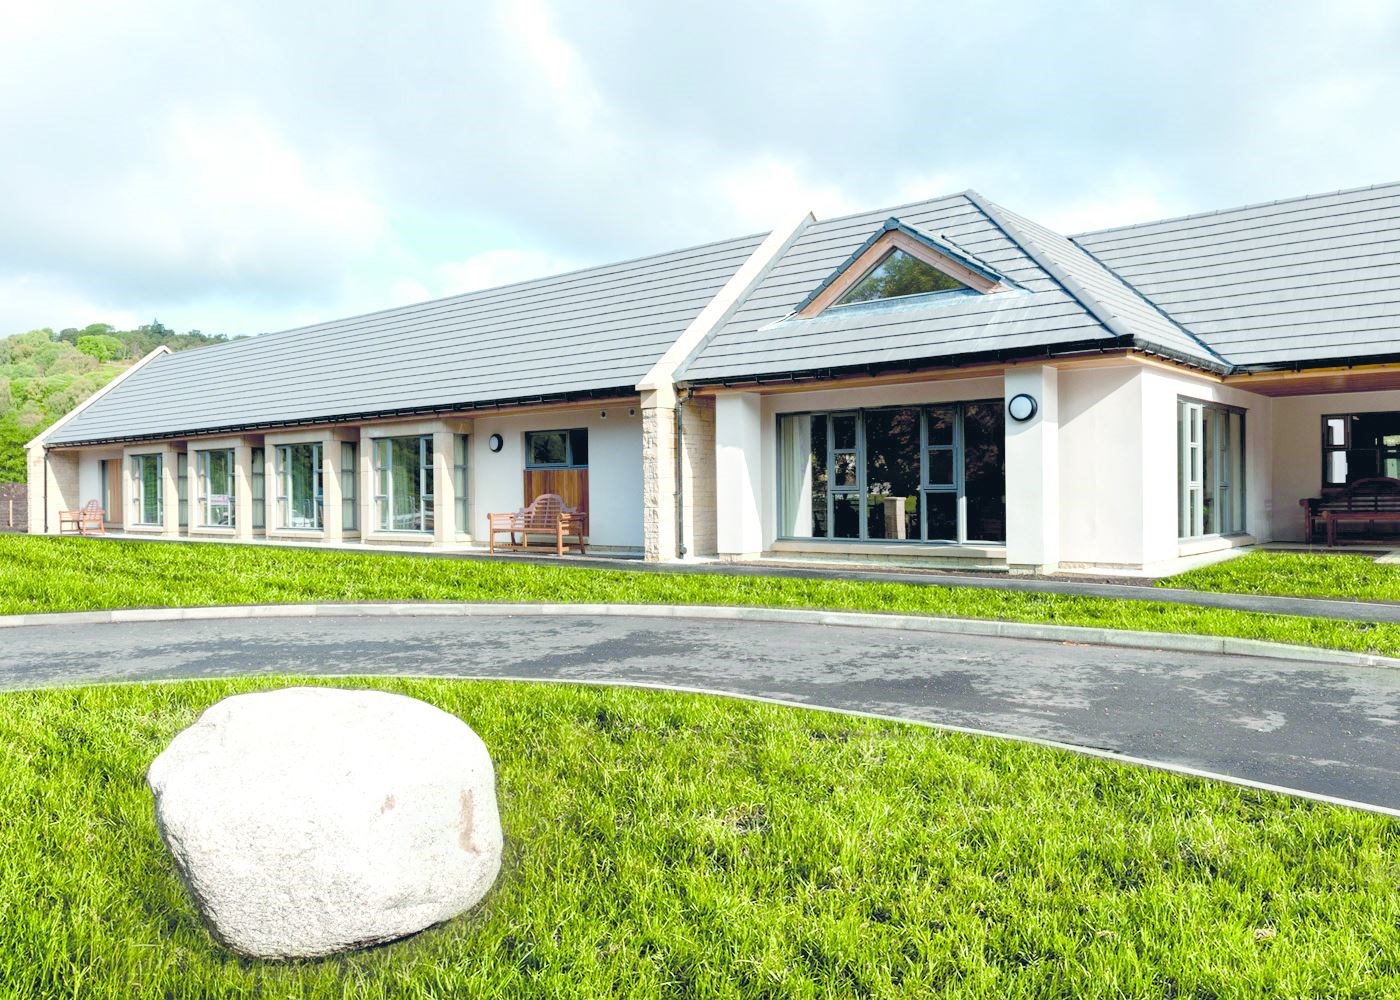 Lynemore Care Home in Grantown can look after up to 40 elderly residents.